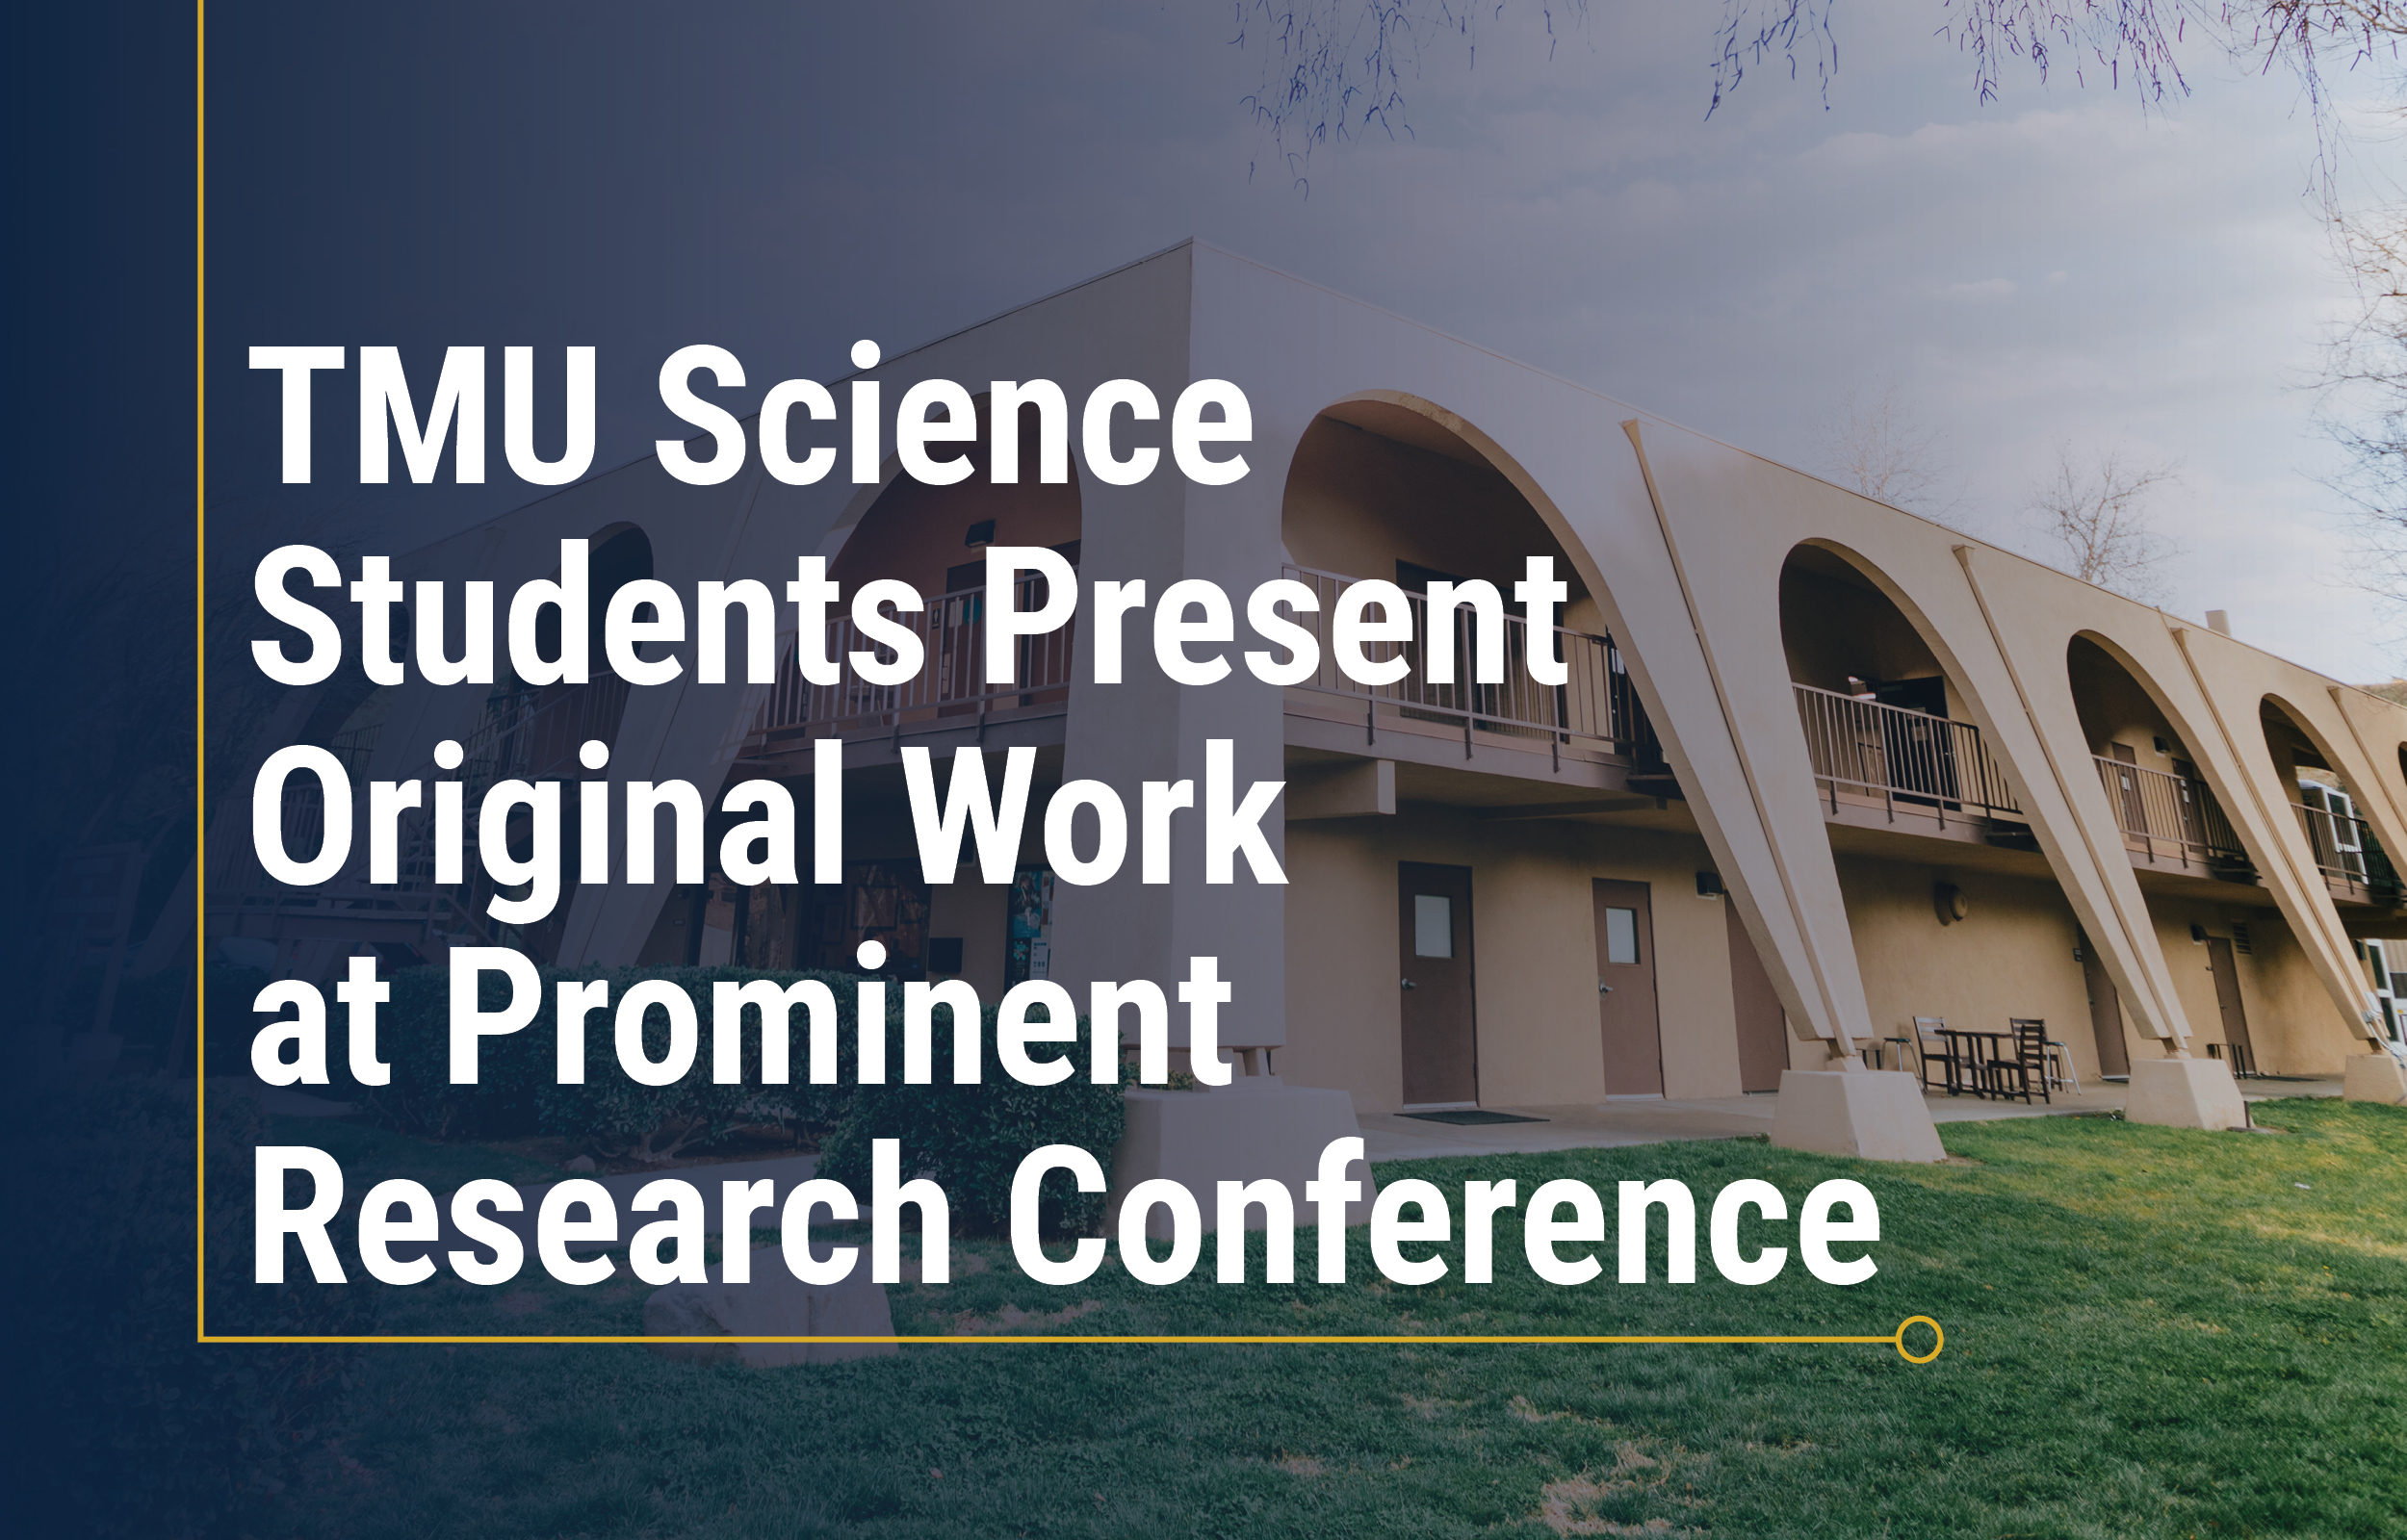 TMU Science Students Present Original Work at Prominent Research Conference